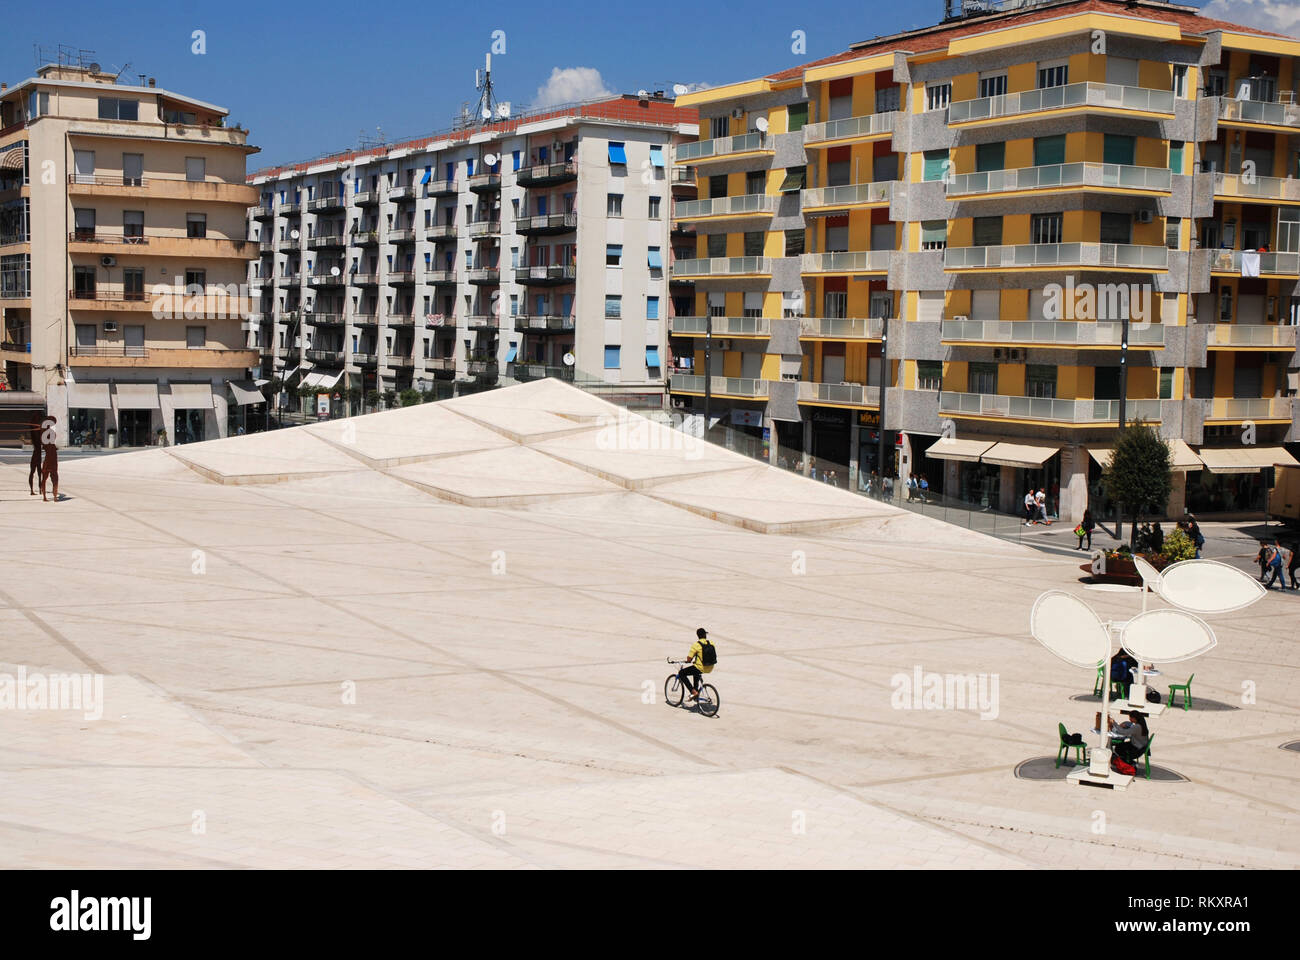 view of the particular shape of bilotti square ex fera square with raised edges in the center of cosenza city calabria italy Stock Photo